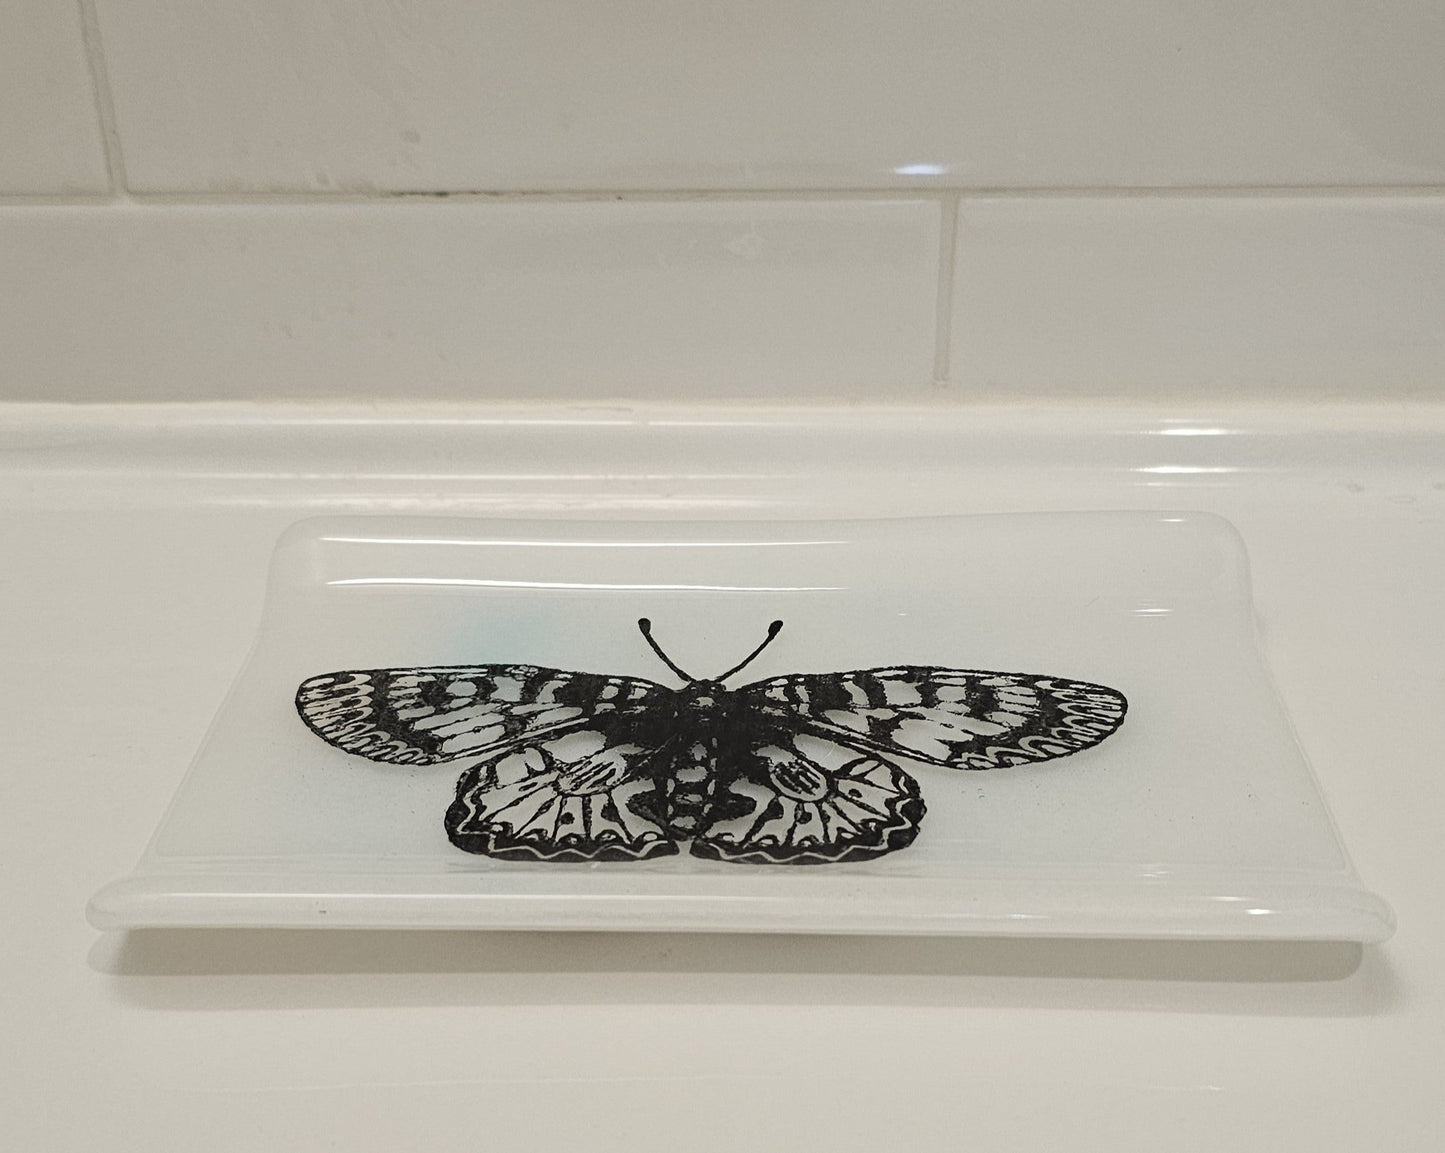 Butterfly Dish, Fused Glass Dish